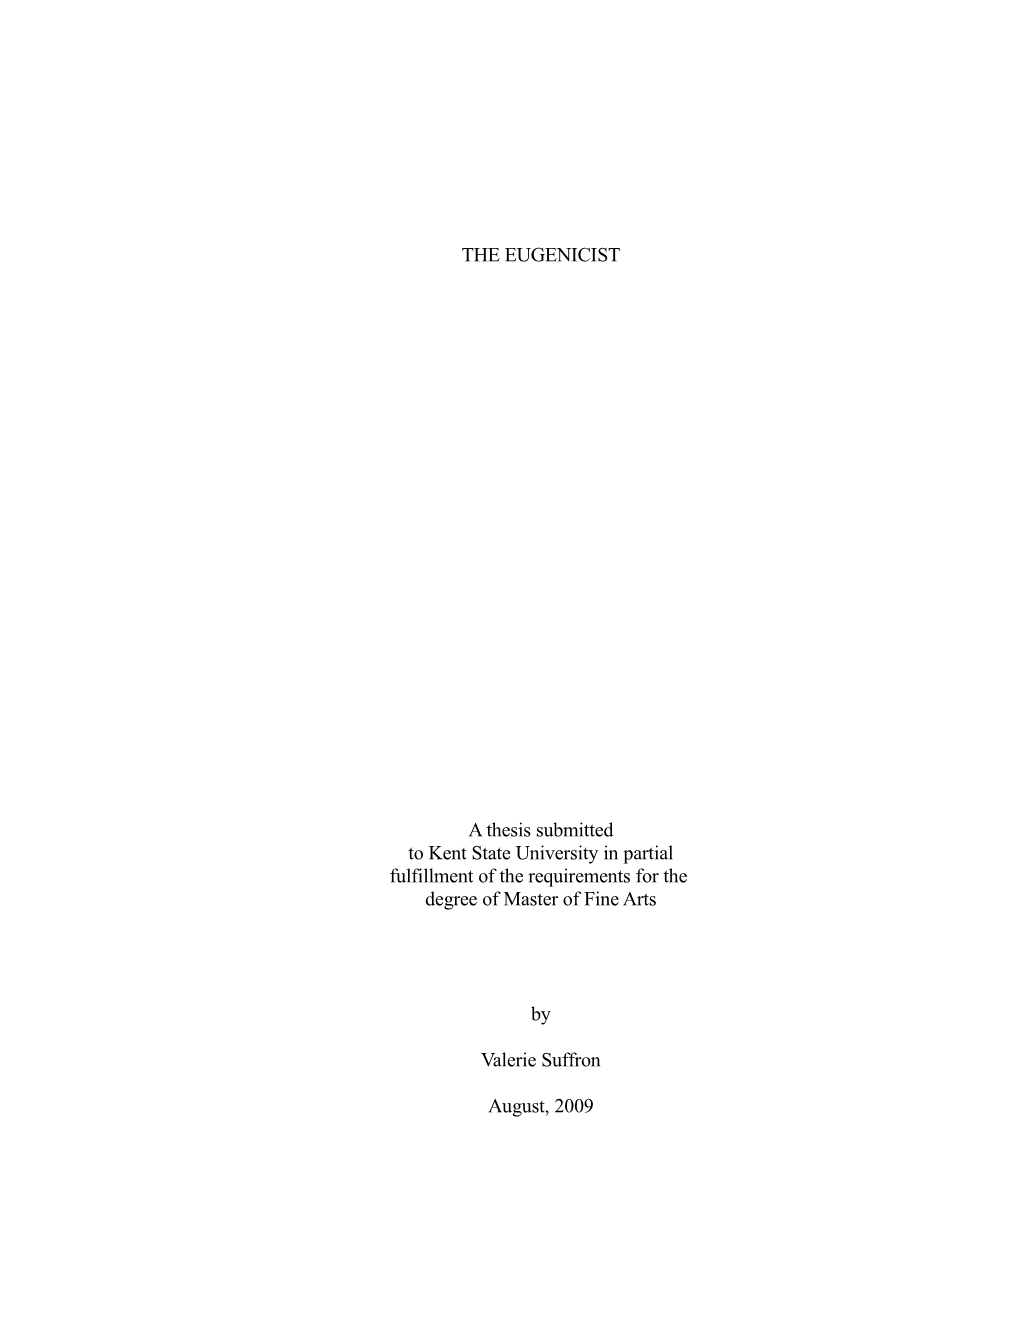 THE EUGENICIST a Thesis Submitted to Kent State University in Partial